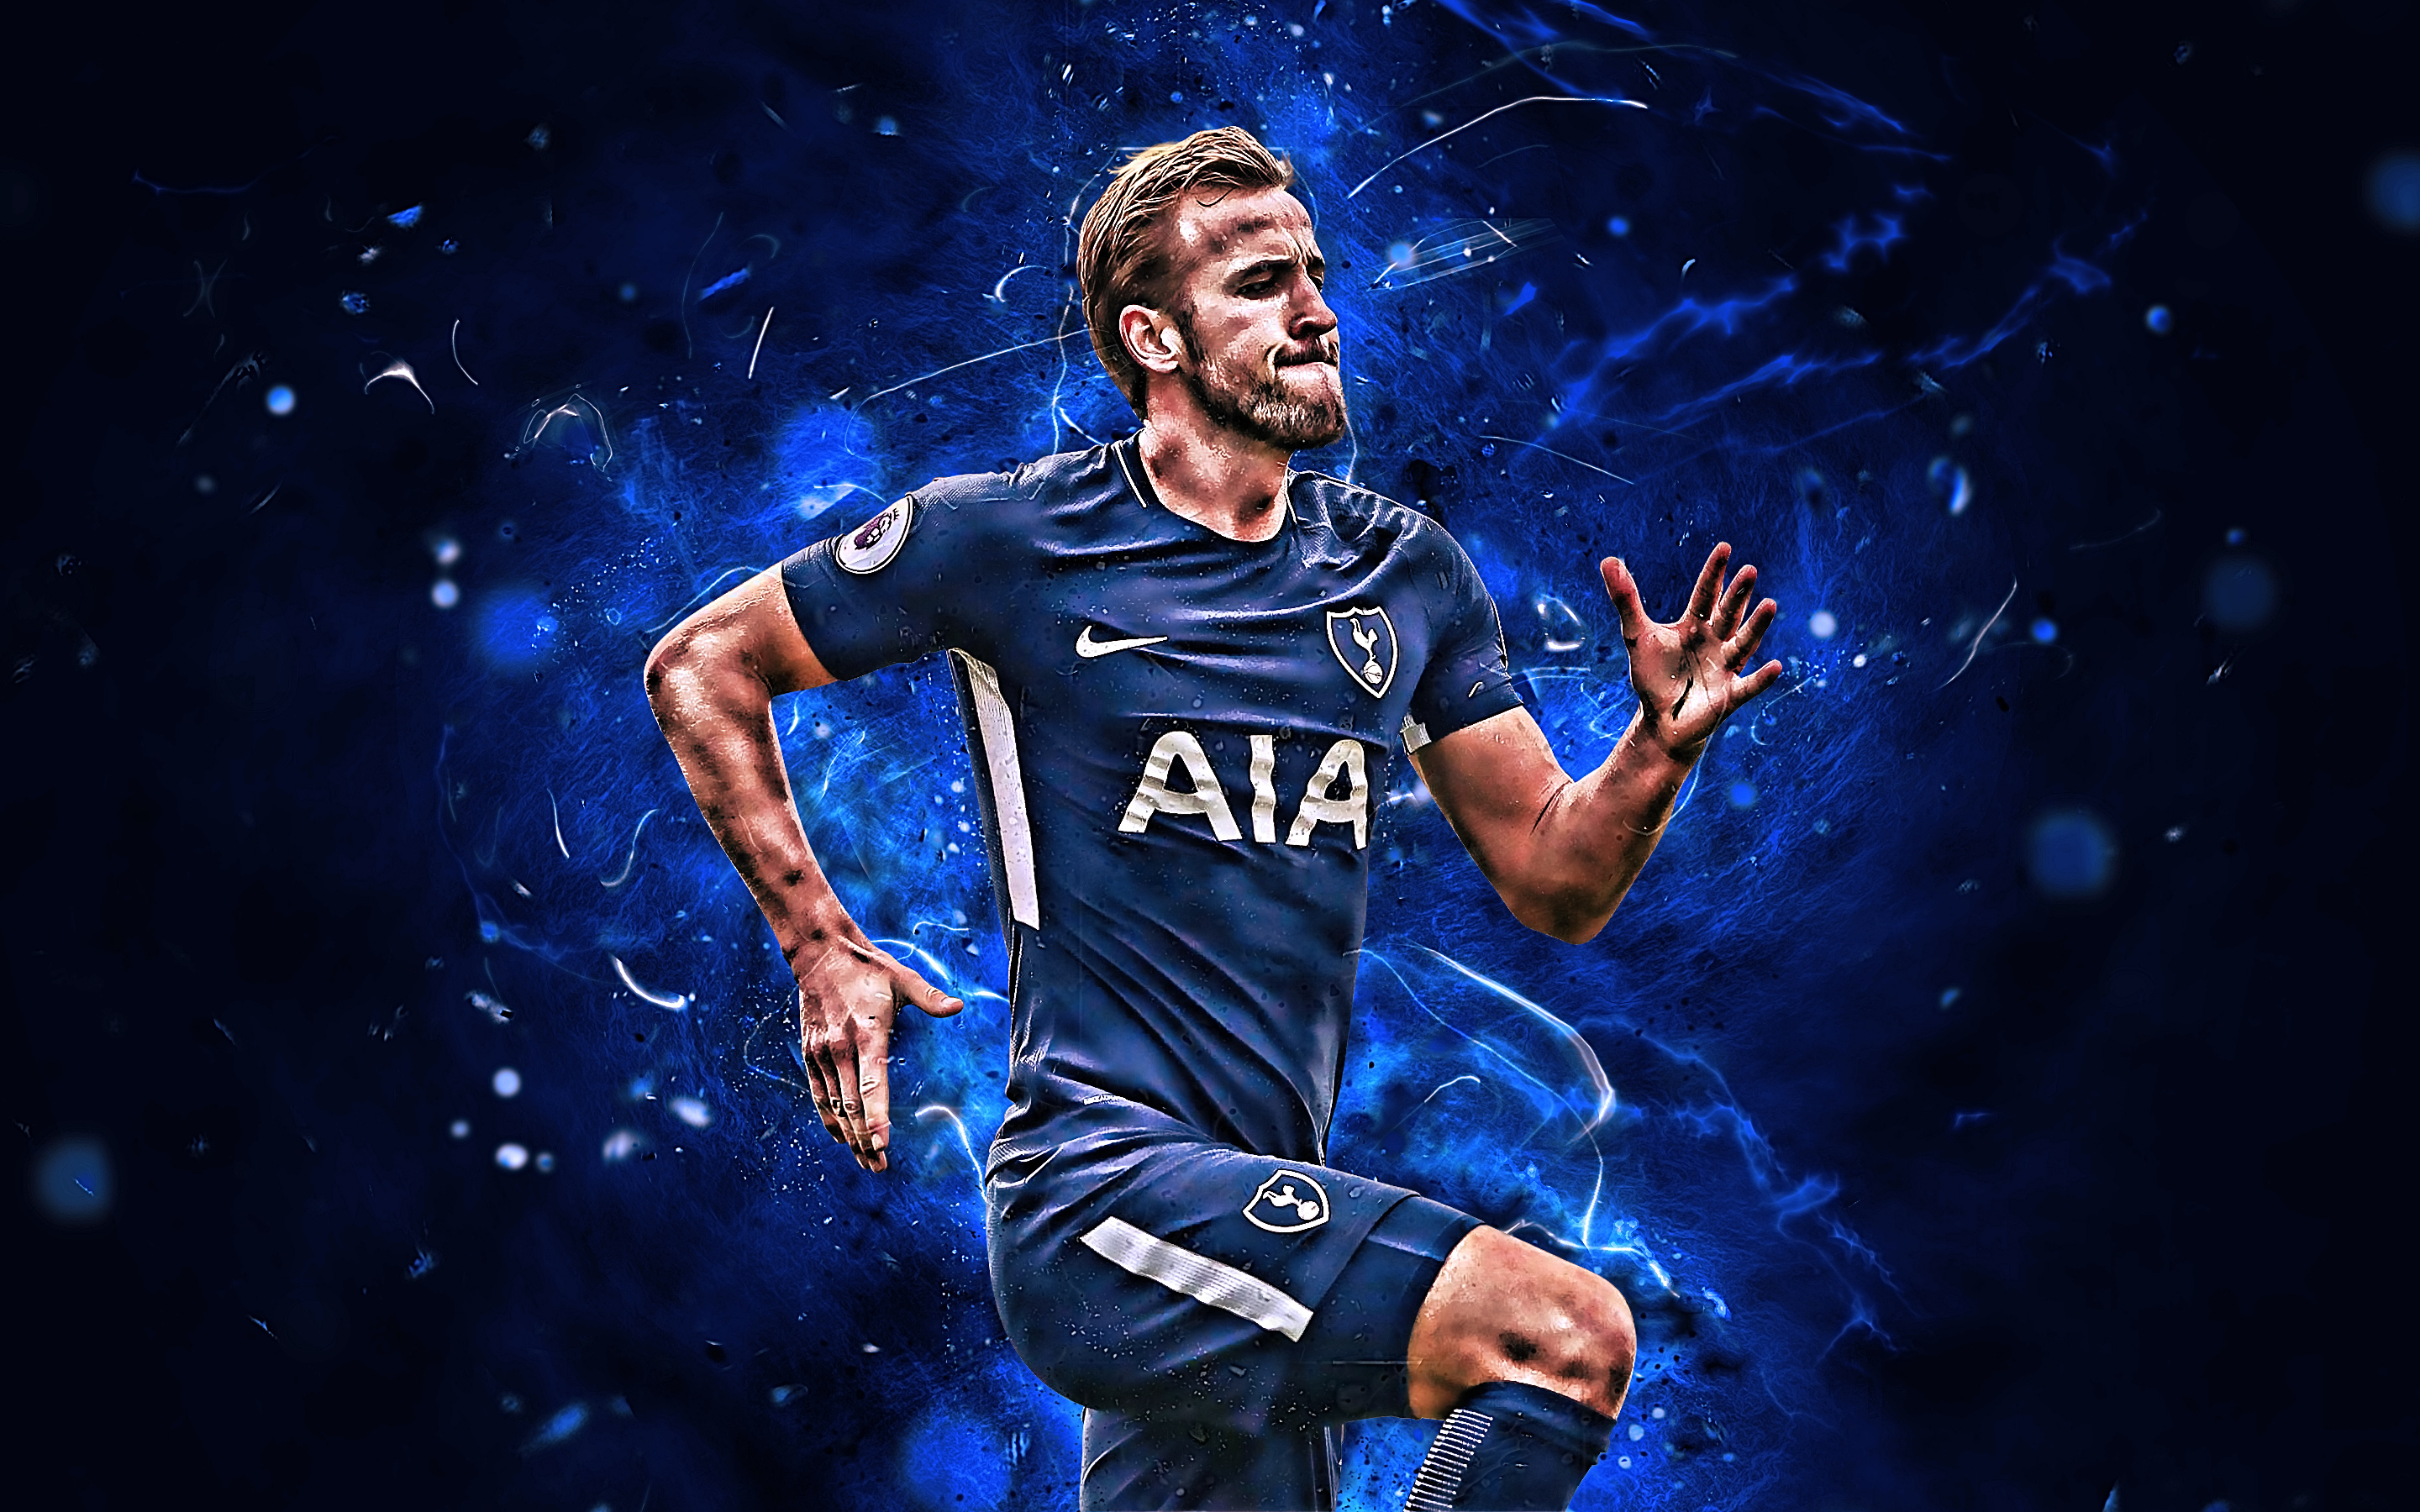 Harry Kane New 2021 Wallpapers